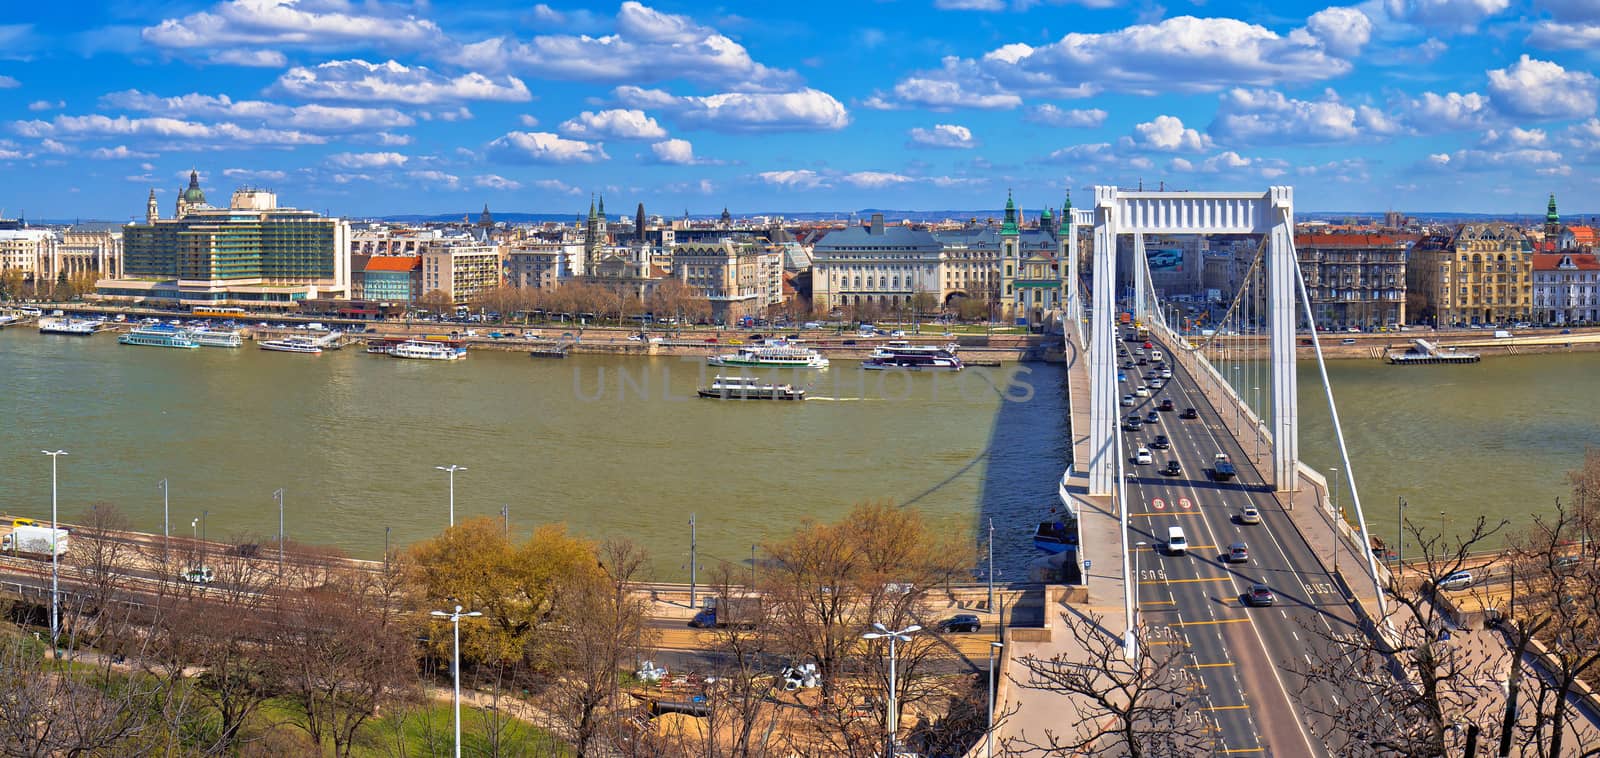 Budapest Danube river waterfront panoramic view by xbrchx